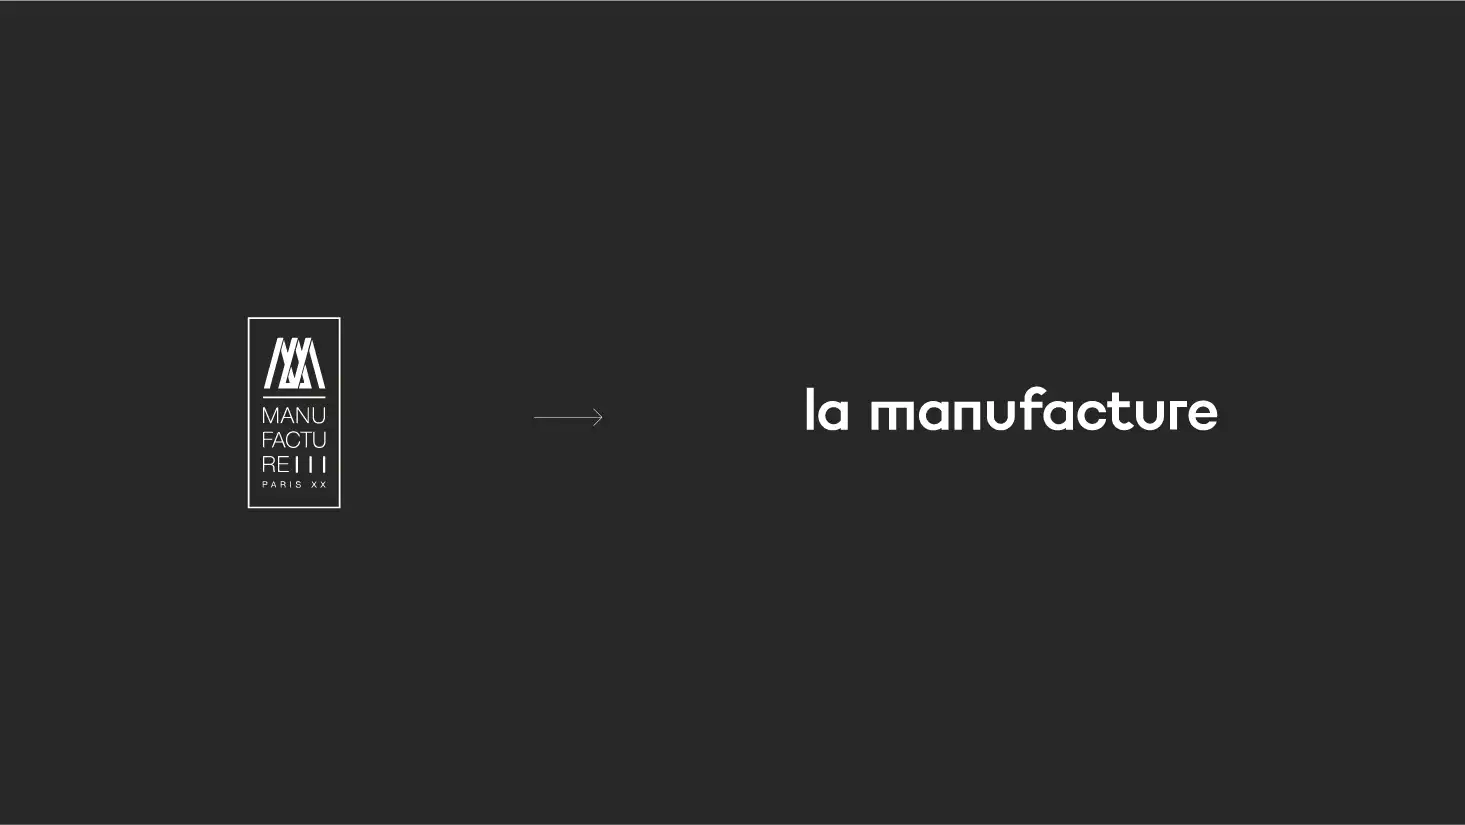 La Manufacture's former logo versus the new one